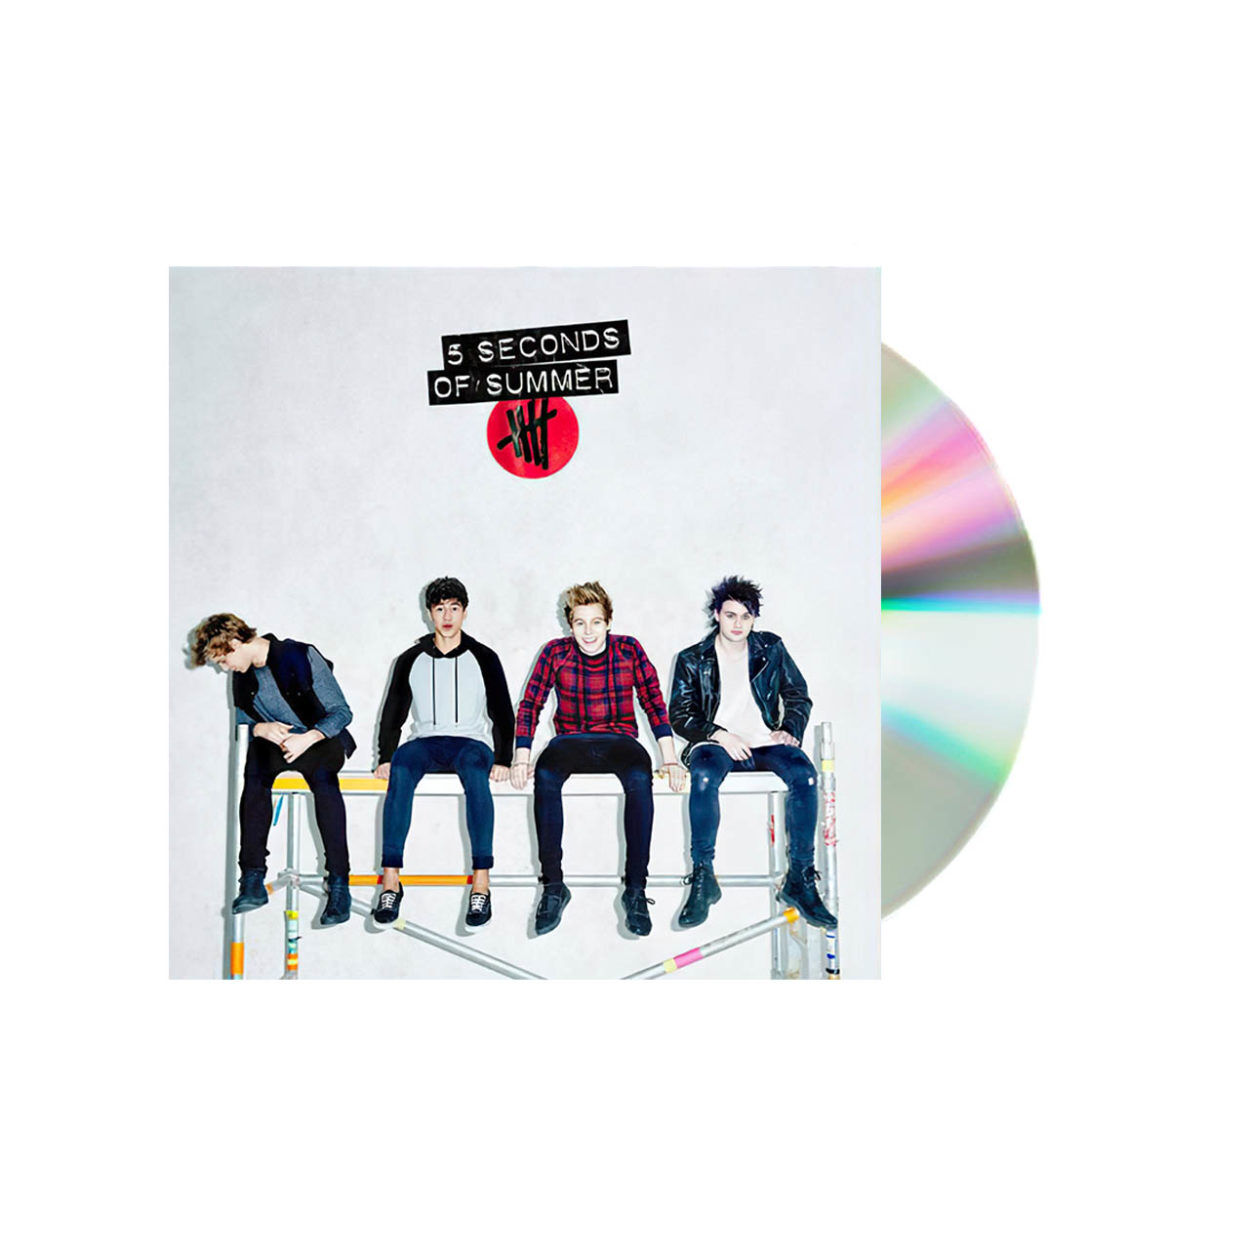 5 Seconds of summer self titled white cd